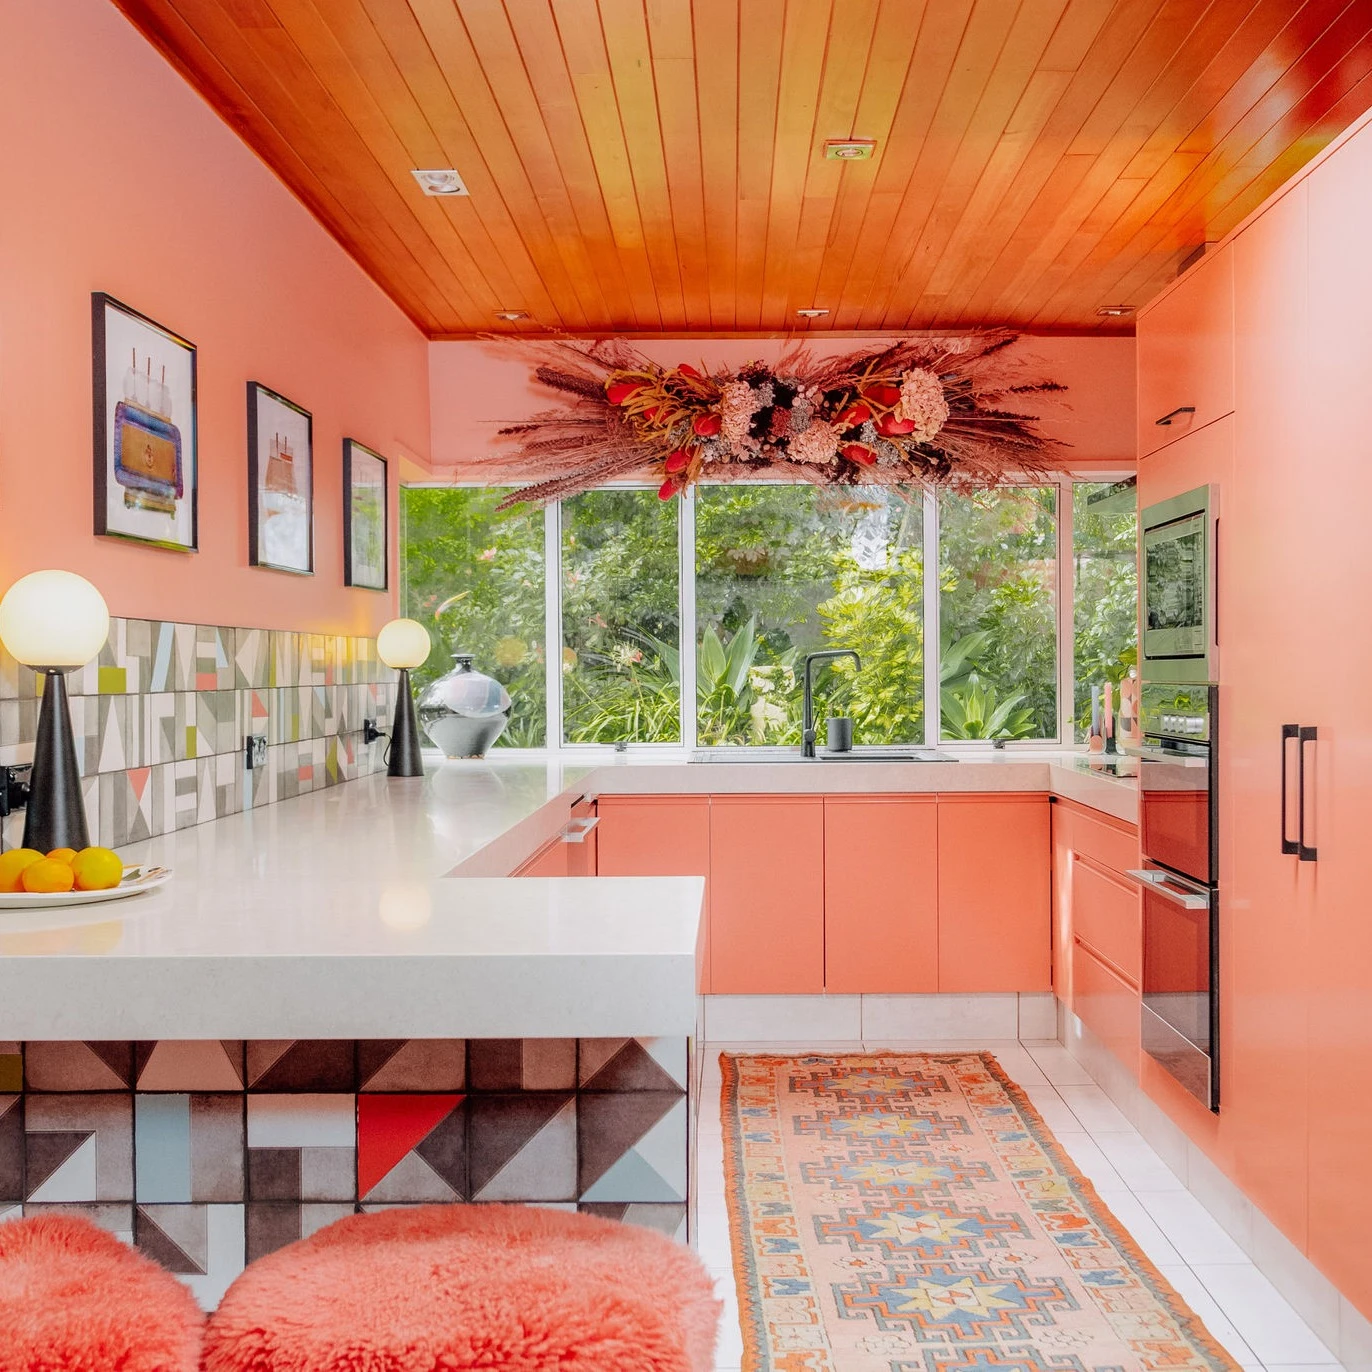 Evie Kemp's kitchen has pink walls and cabinets with a white benchtop. There is a large dried flower arrangement hanging above the benchtop and there are three pieces of art on the left wall.